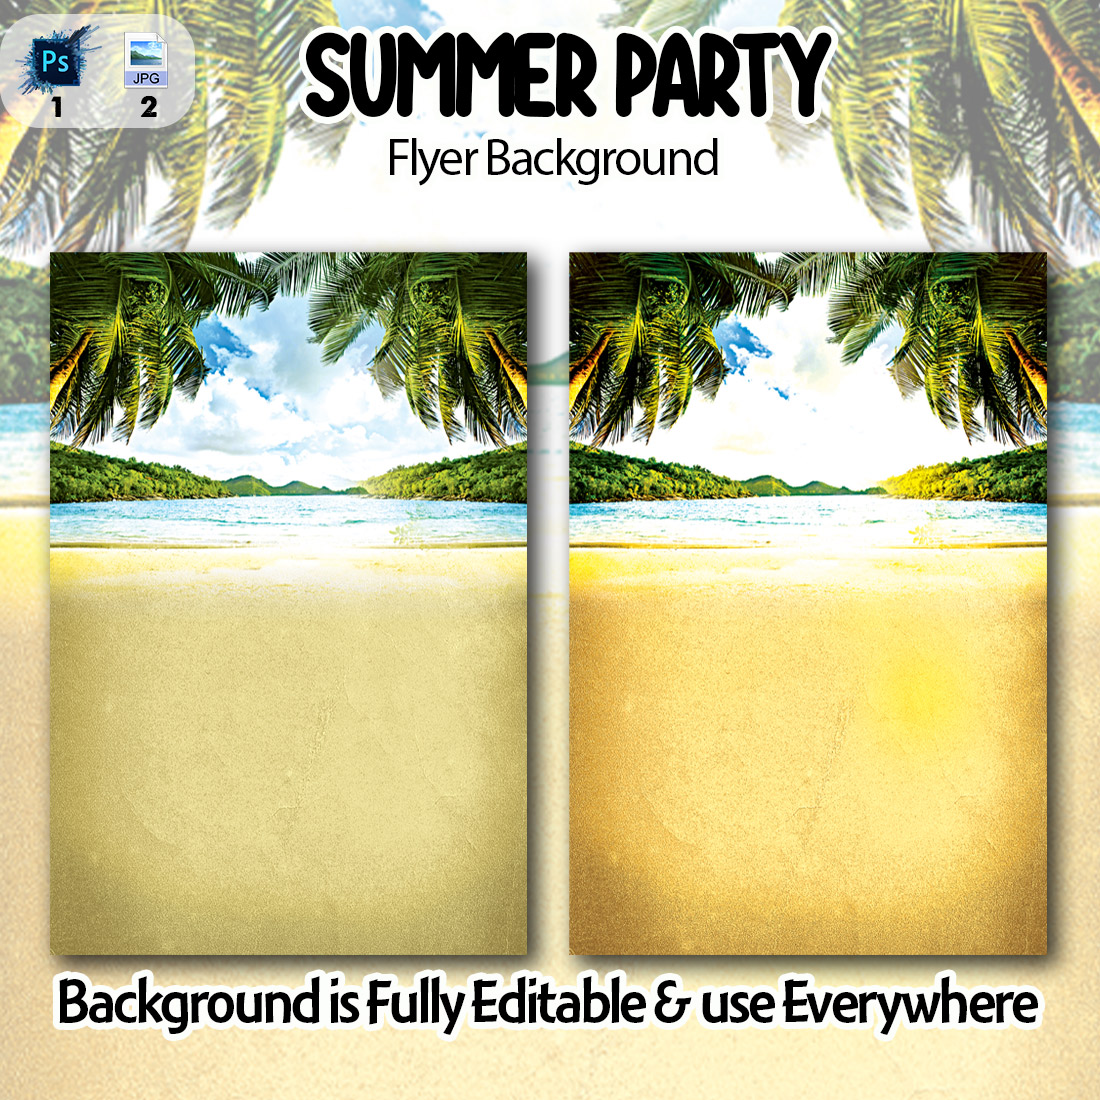 Summer Party Background Flyer cover image.